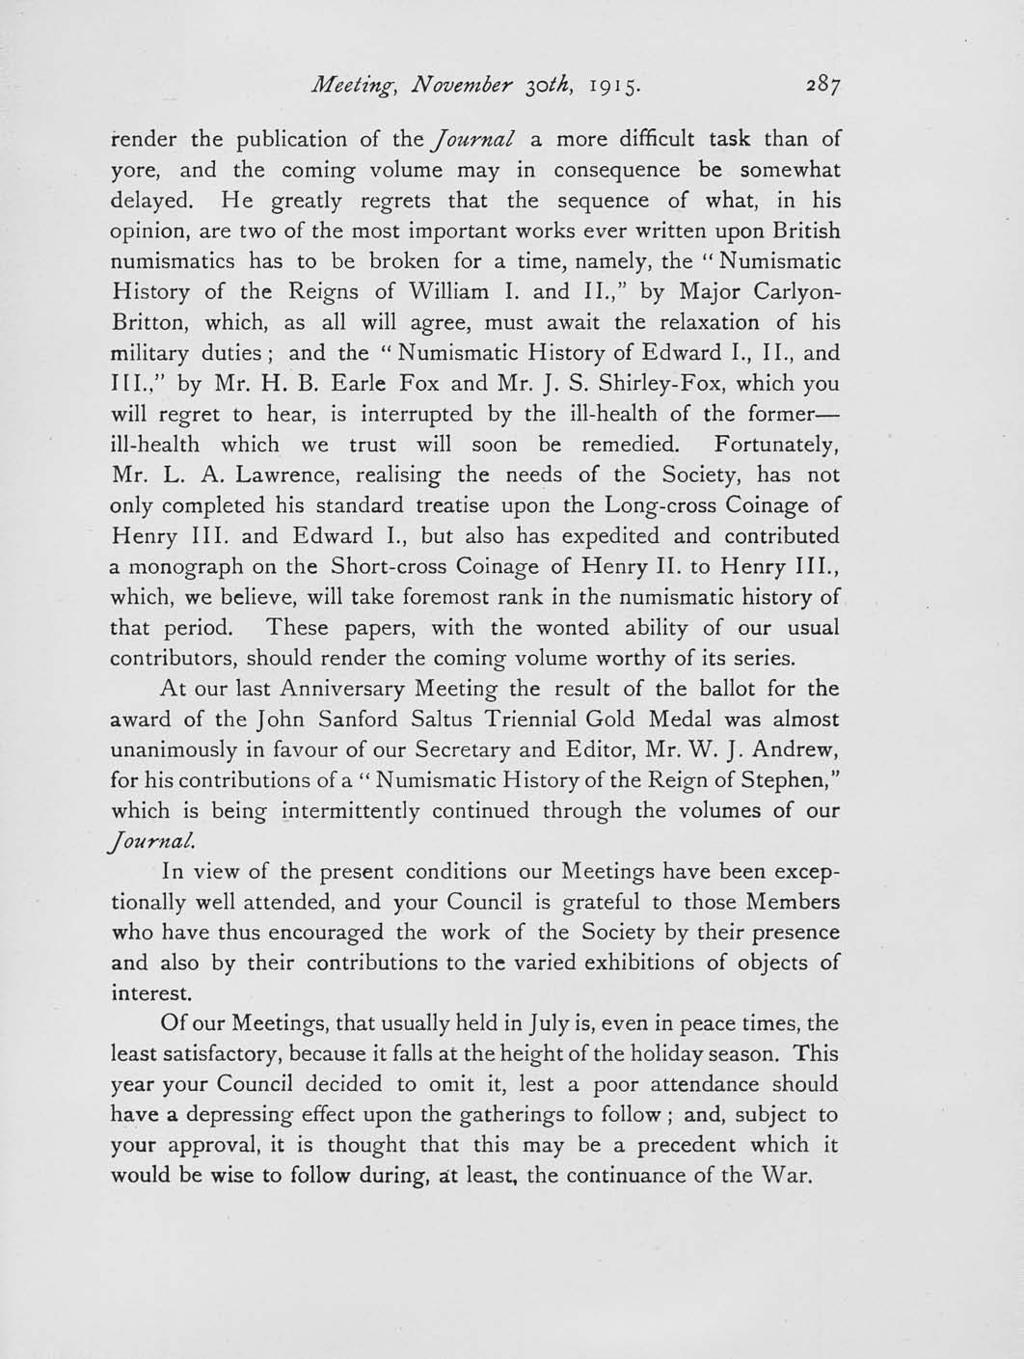 Meeting, November 30th, 1915. 28 render the publication of the Joiirnal a more difficult task than of yore, and the coming volume may in consequence be somewhat delayed.